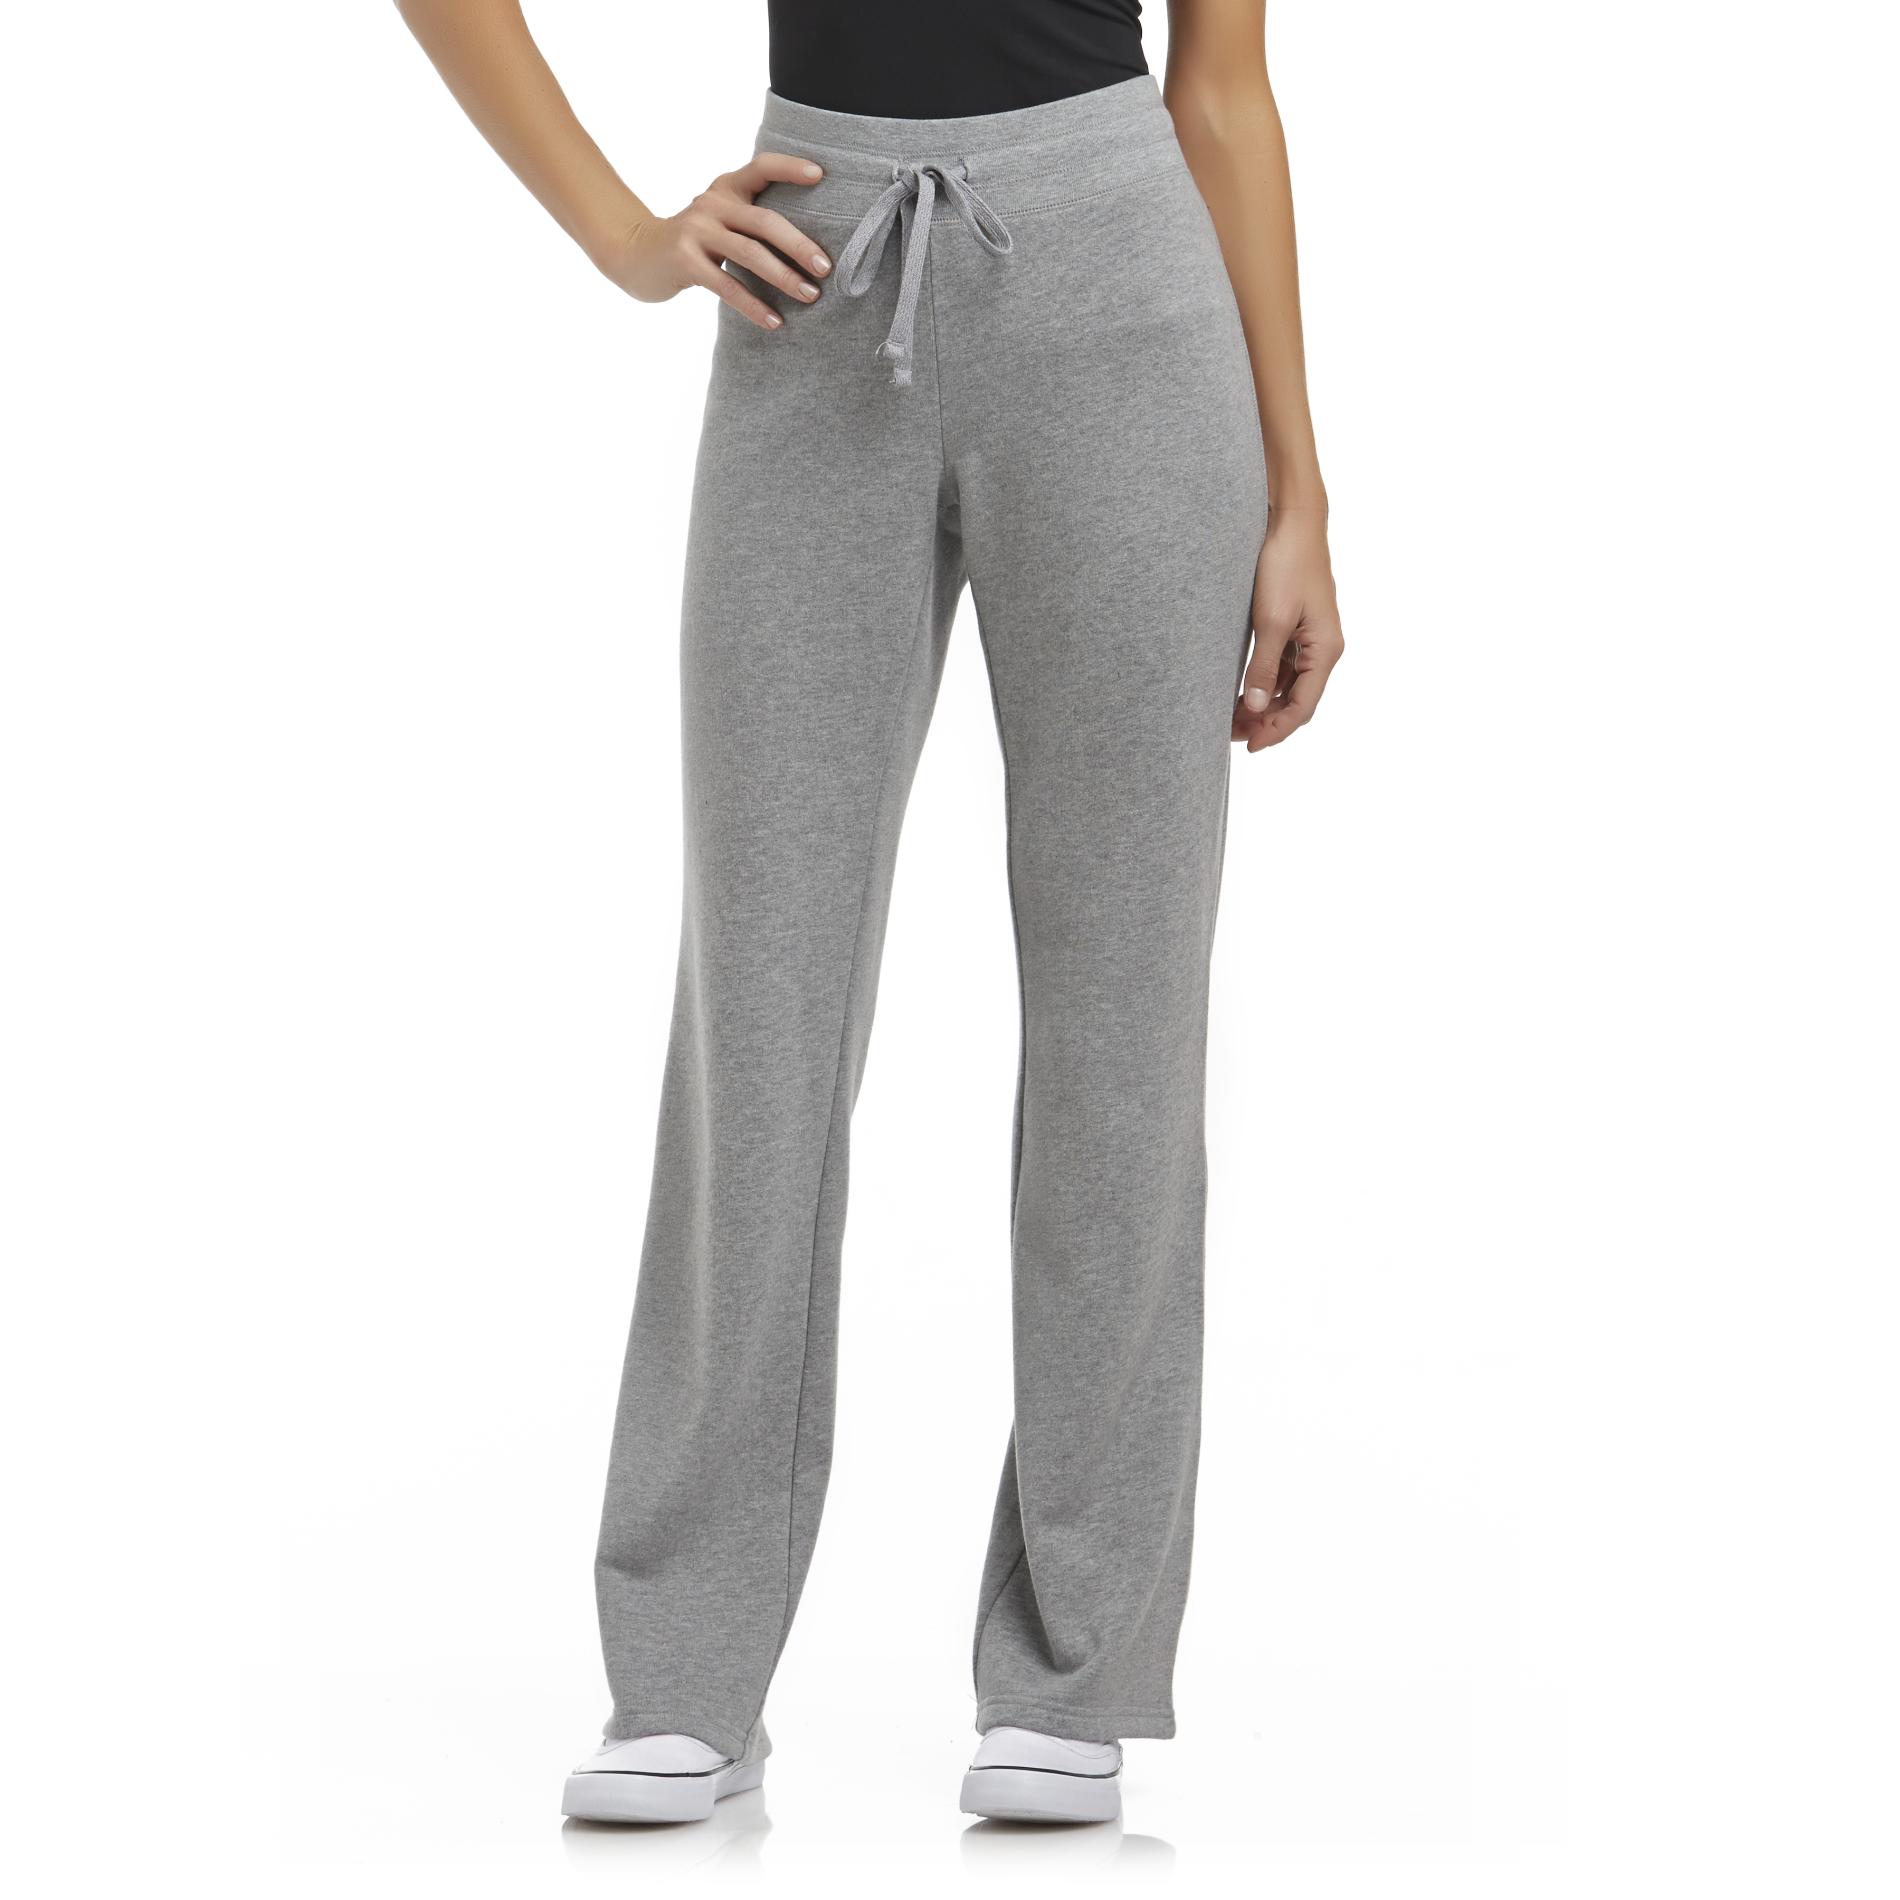 Route 66 Women's Bootcut French Terry Track Pants